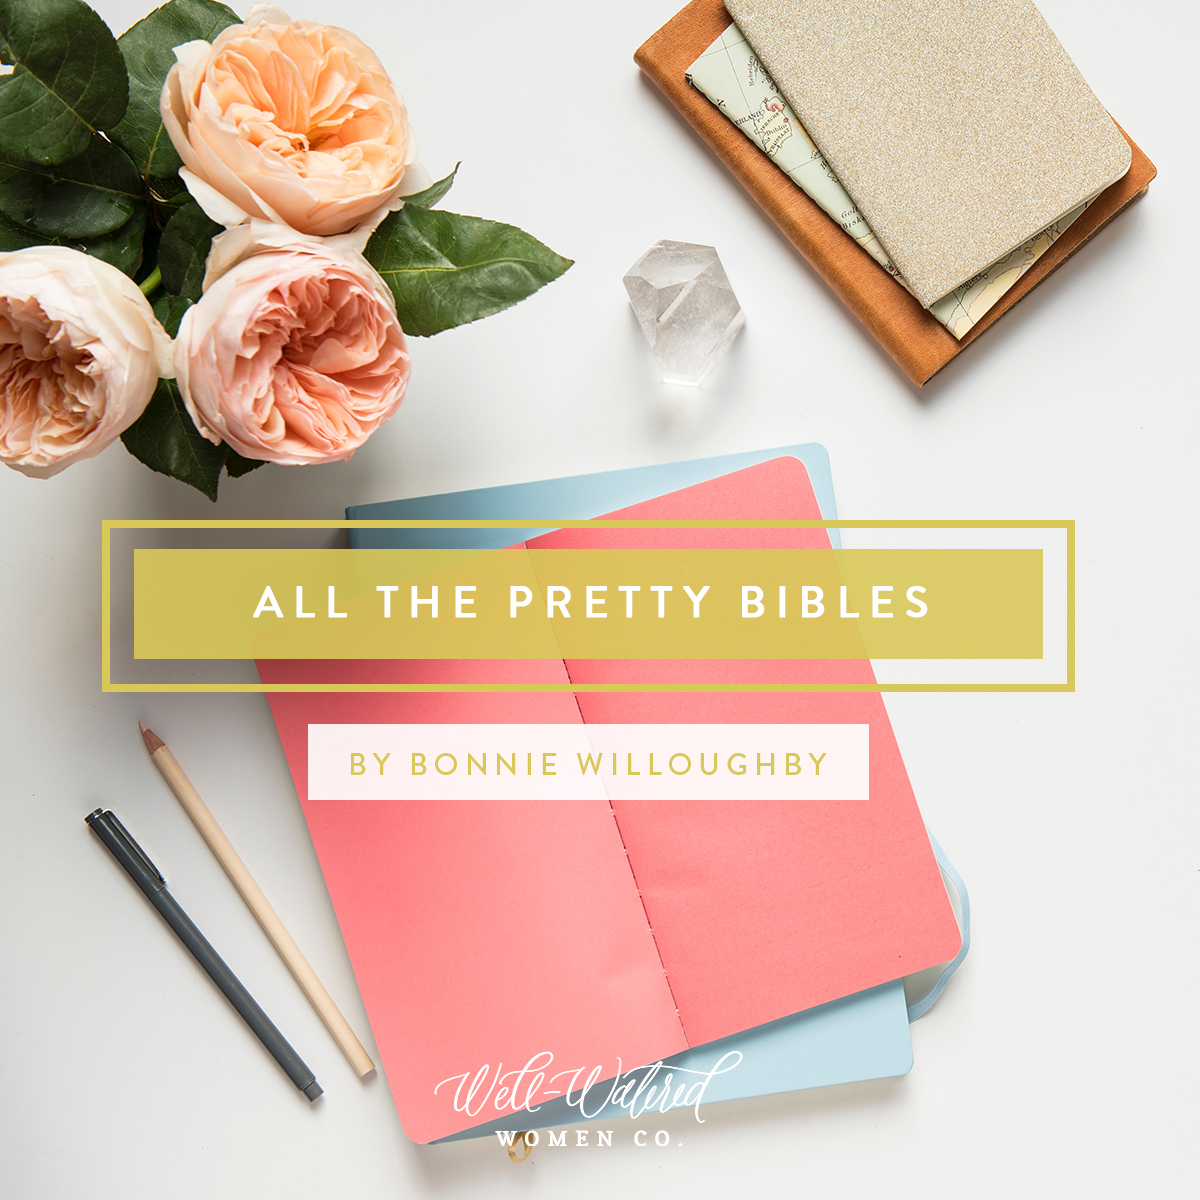 The Pretty Bible: They don't say anything different. And if you don't make time for the one you have at home, you won't make time for one of these. No matter how pretty it is.